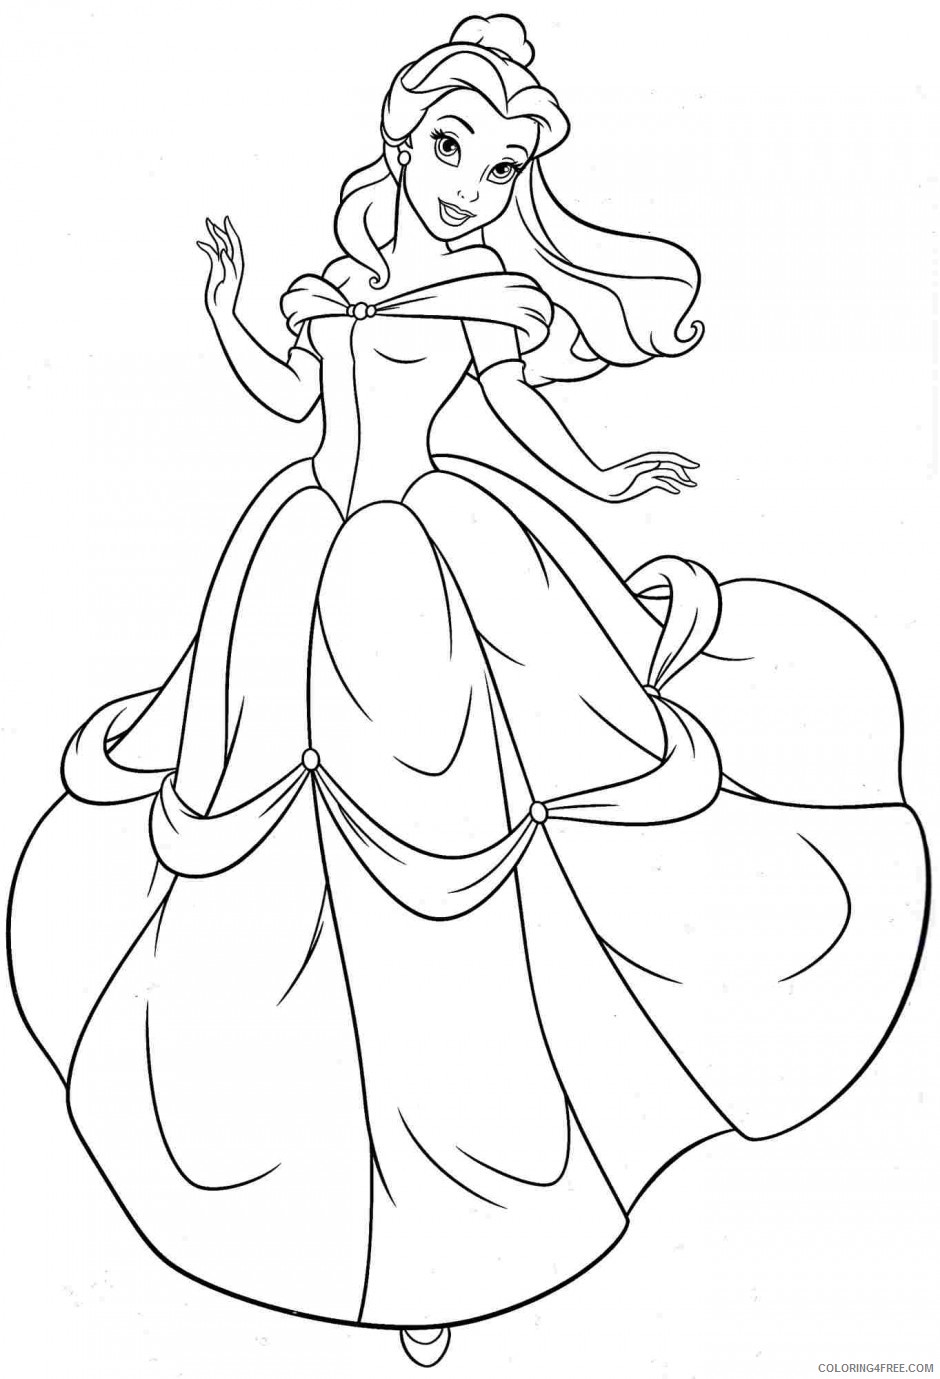 Princess Belle Coloring Pages Cartoons Belle Princess 2 Printable 2020 5099 Coloring4free